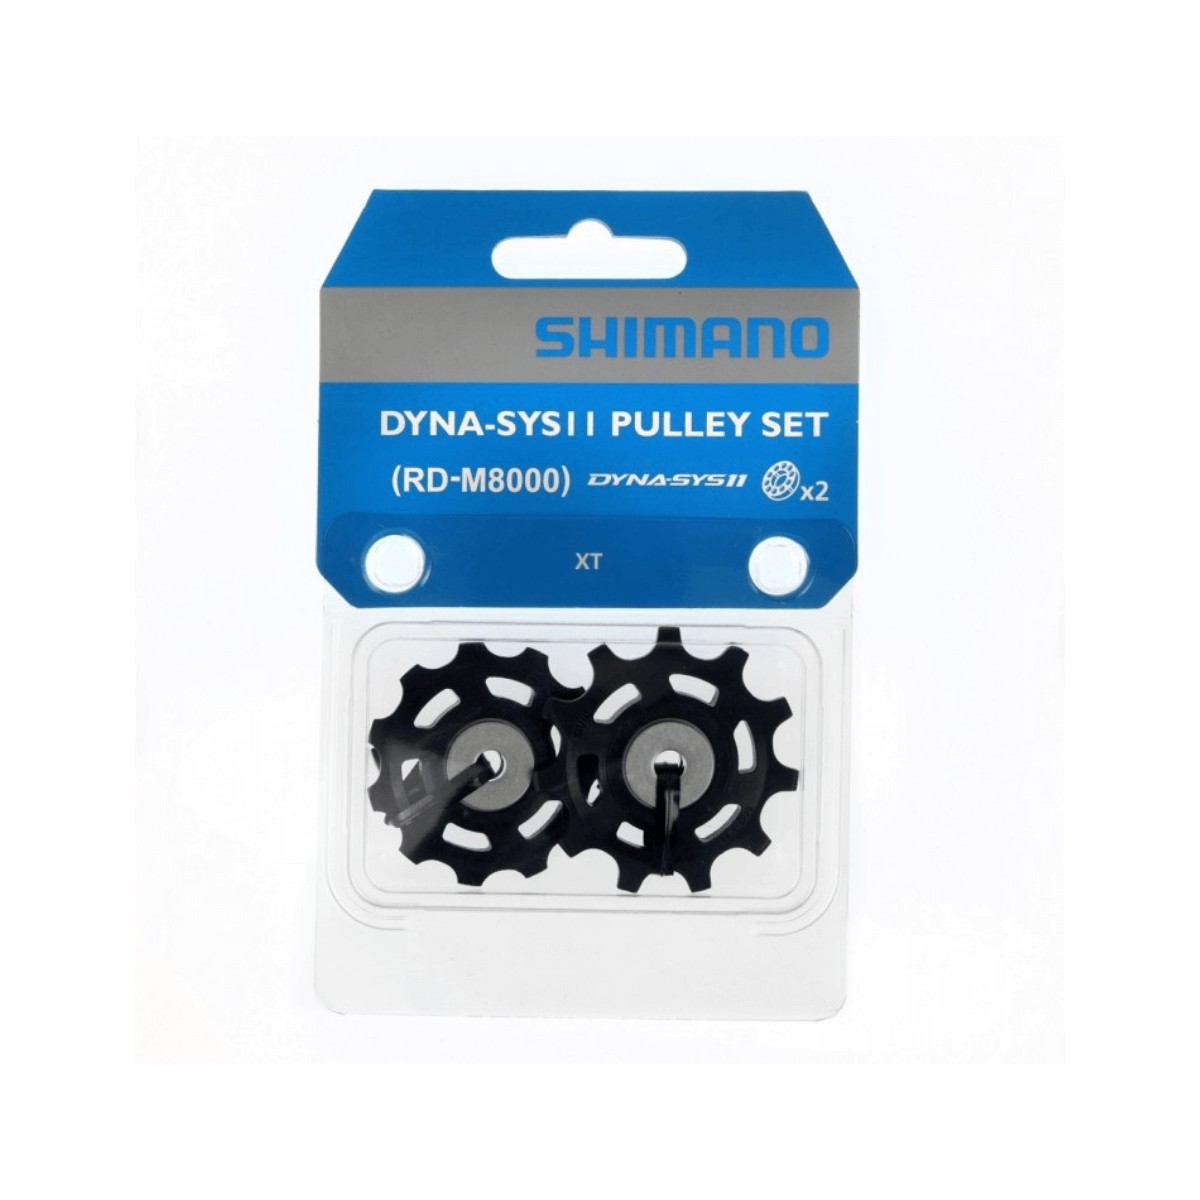 Shimano derailleur pulleys for XT 11s (RD-M8000)